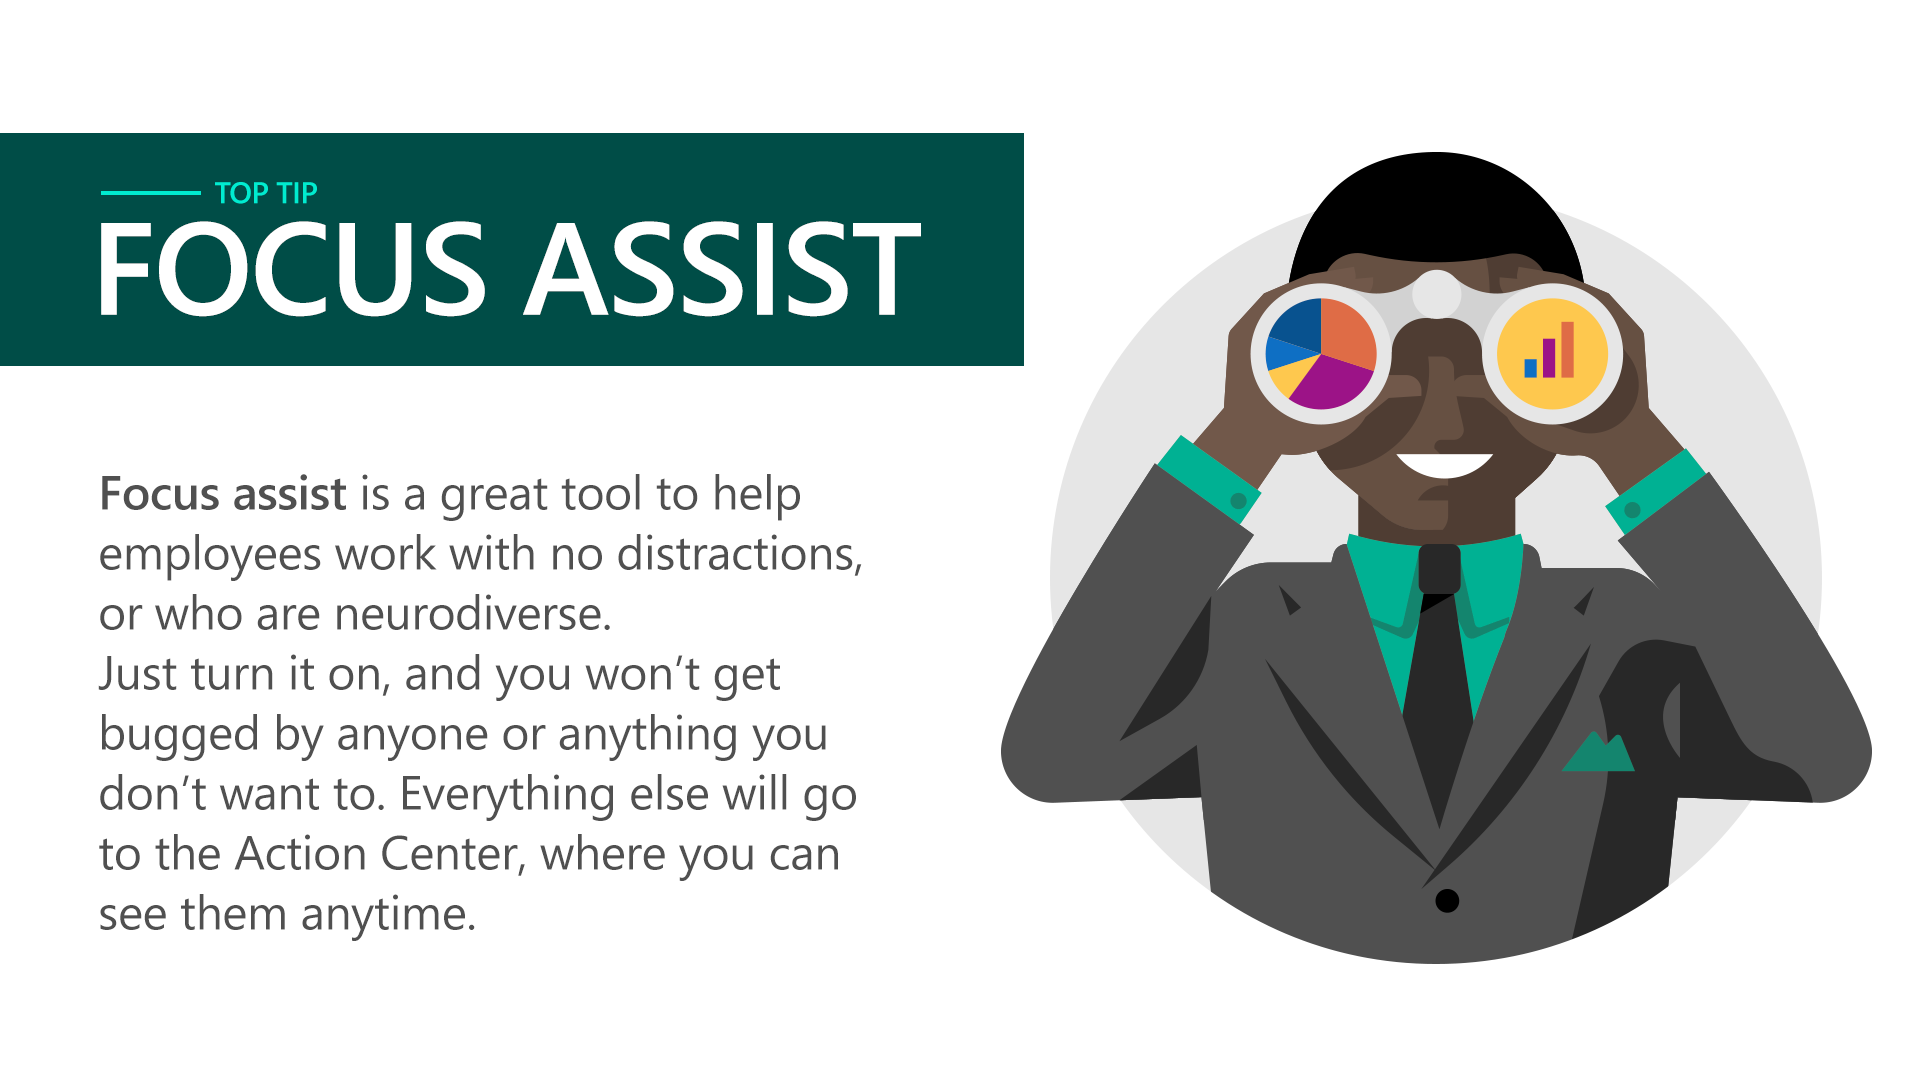 Focus assist is great tool to help employees work with no distractions, or who are neurodiverse. Just turn it on, and you won’t get bugged by anyone or anything you don’t want to. Everything else will go to the Action Center, where you can see them anytime.